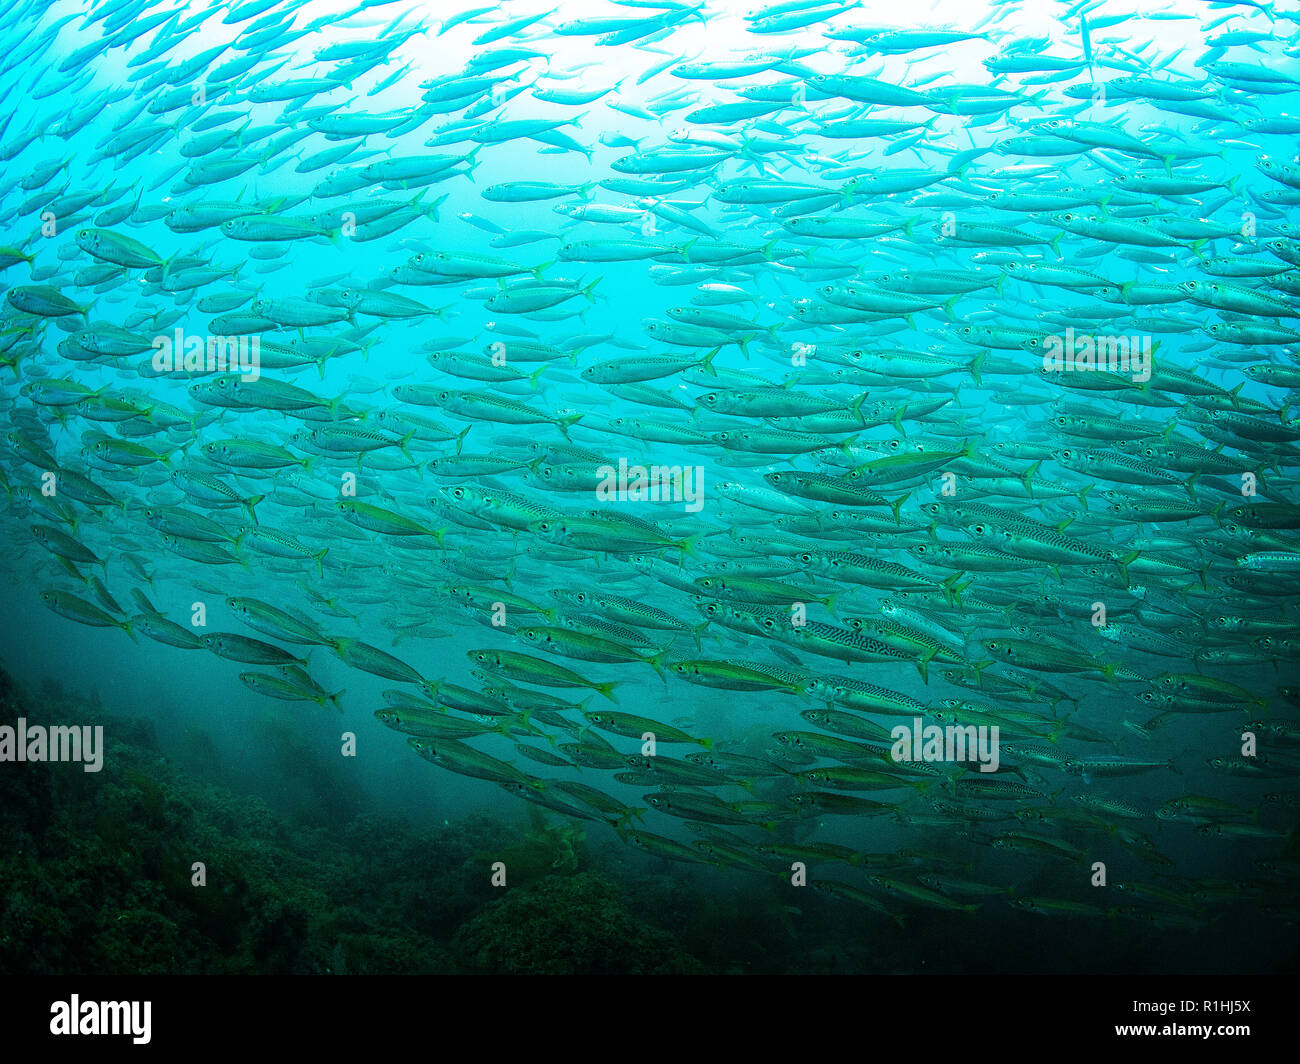 The chub mackerel, Pacific mackerel, or Pacific chub mackerel (Scomber japonicus) photographed in the Channel Islands National Park, California Stock Photo